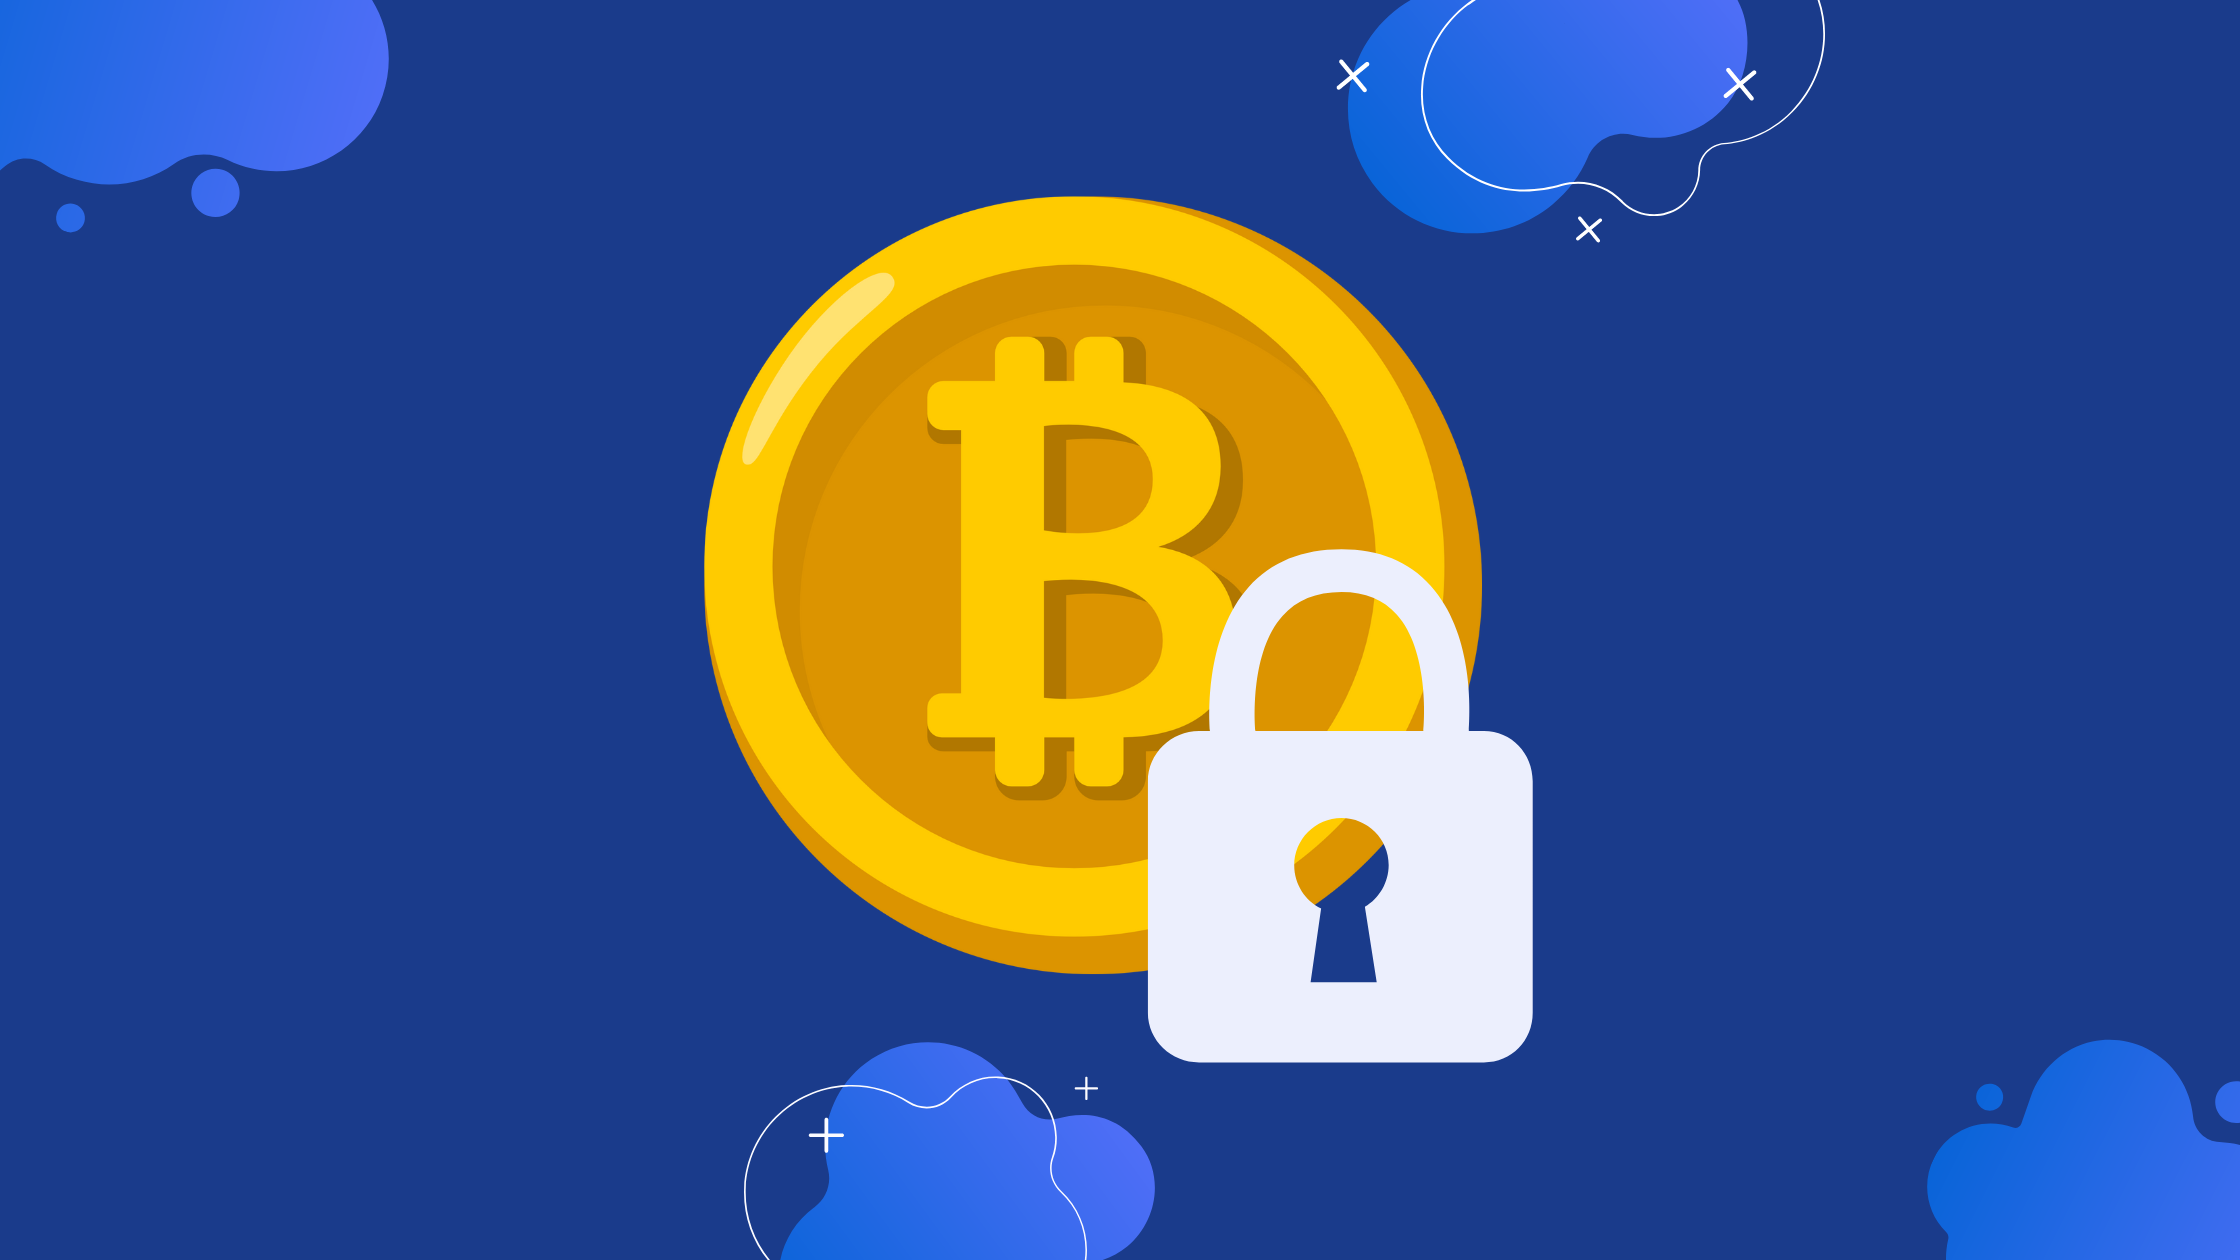 10+ Crypto Security Tips from Experts to Keep Your Cryptocurrency Safe | BitPay